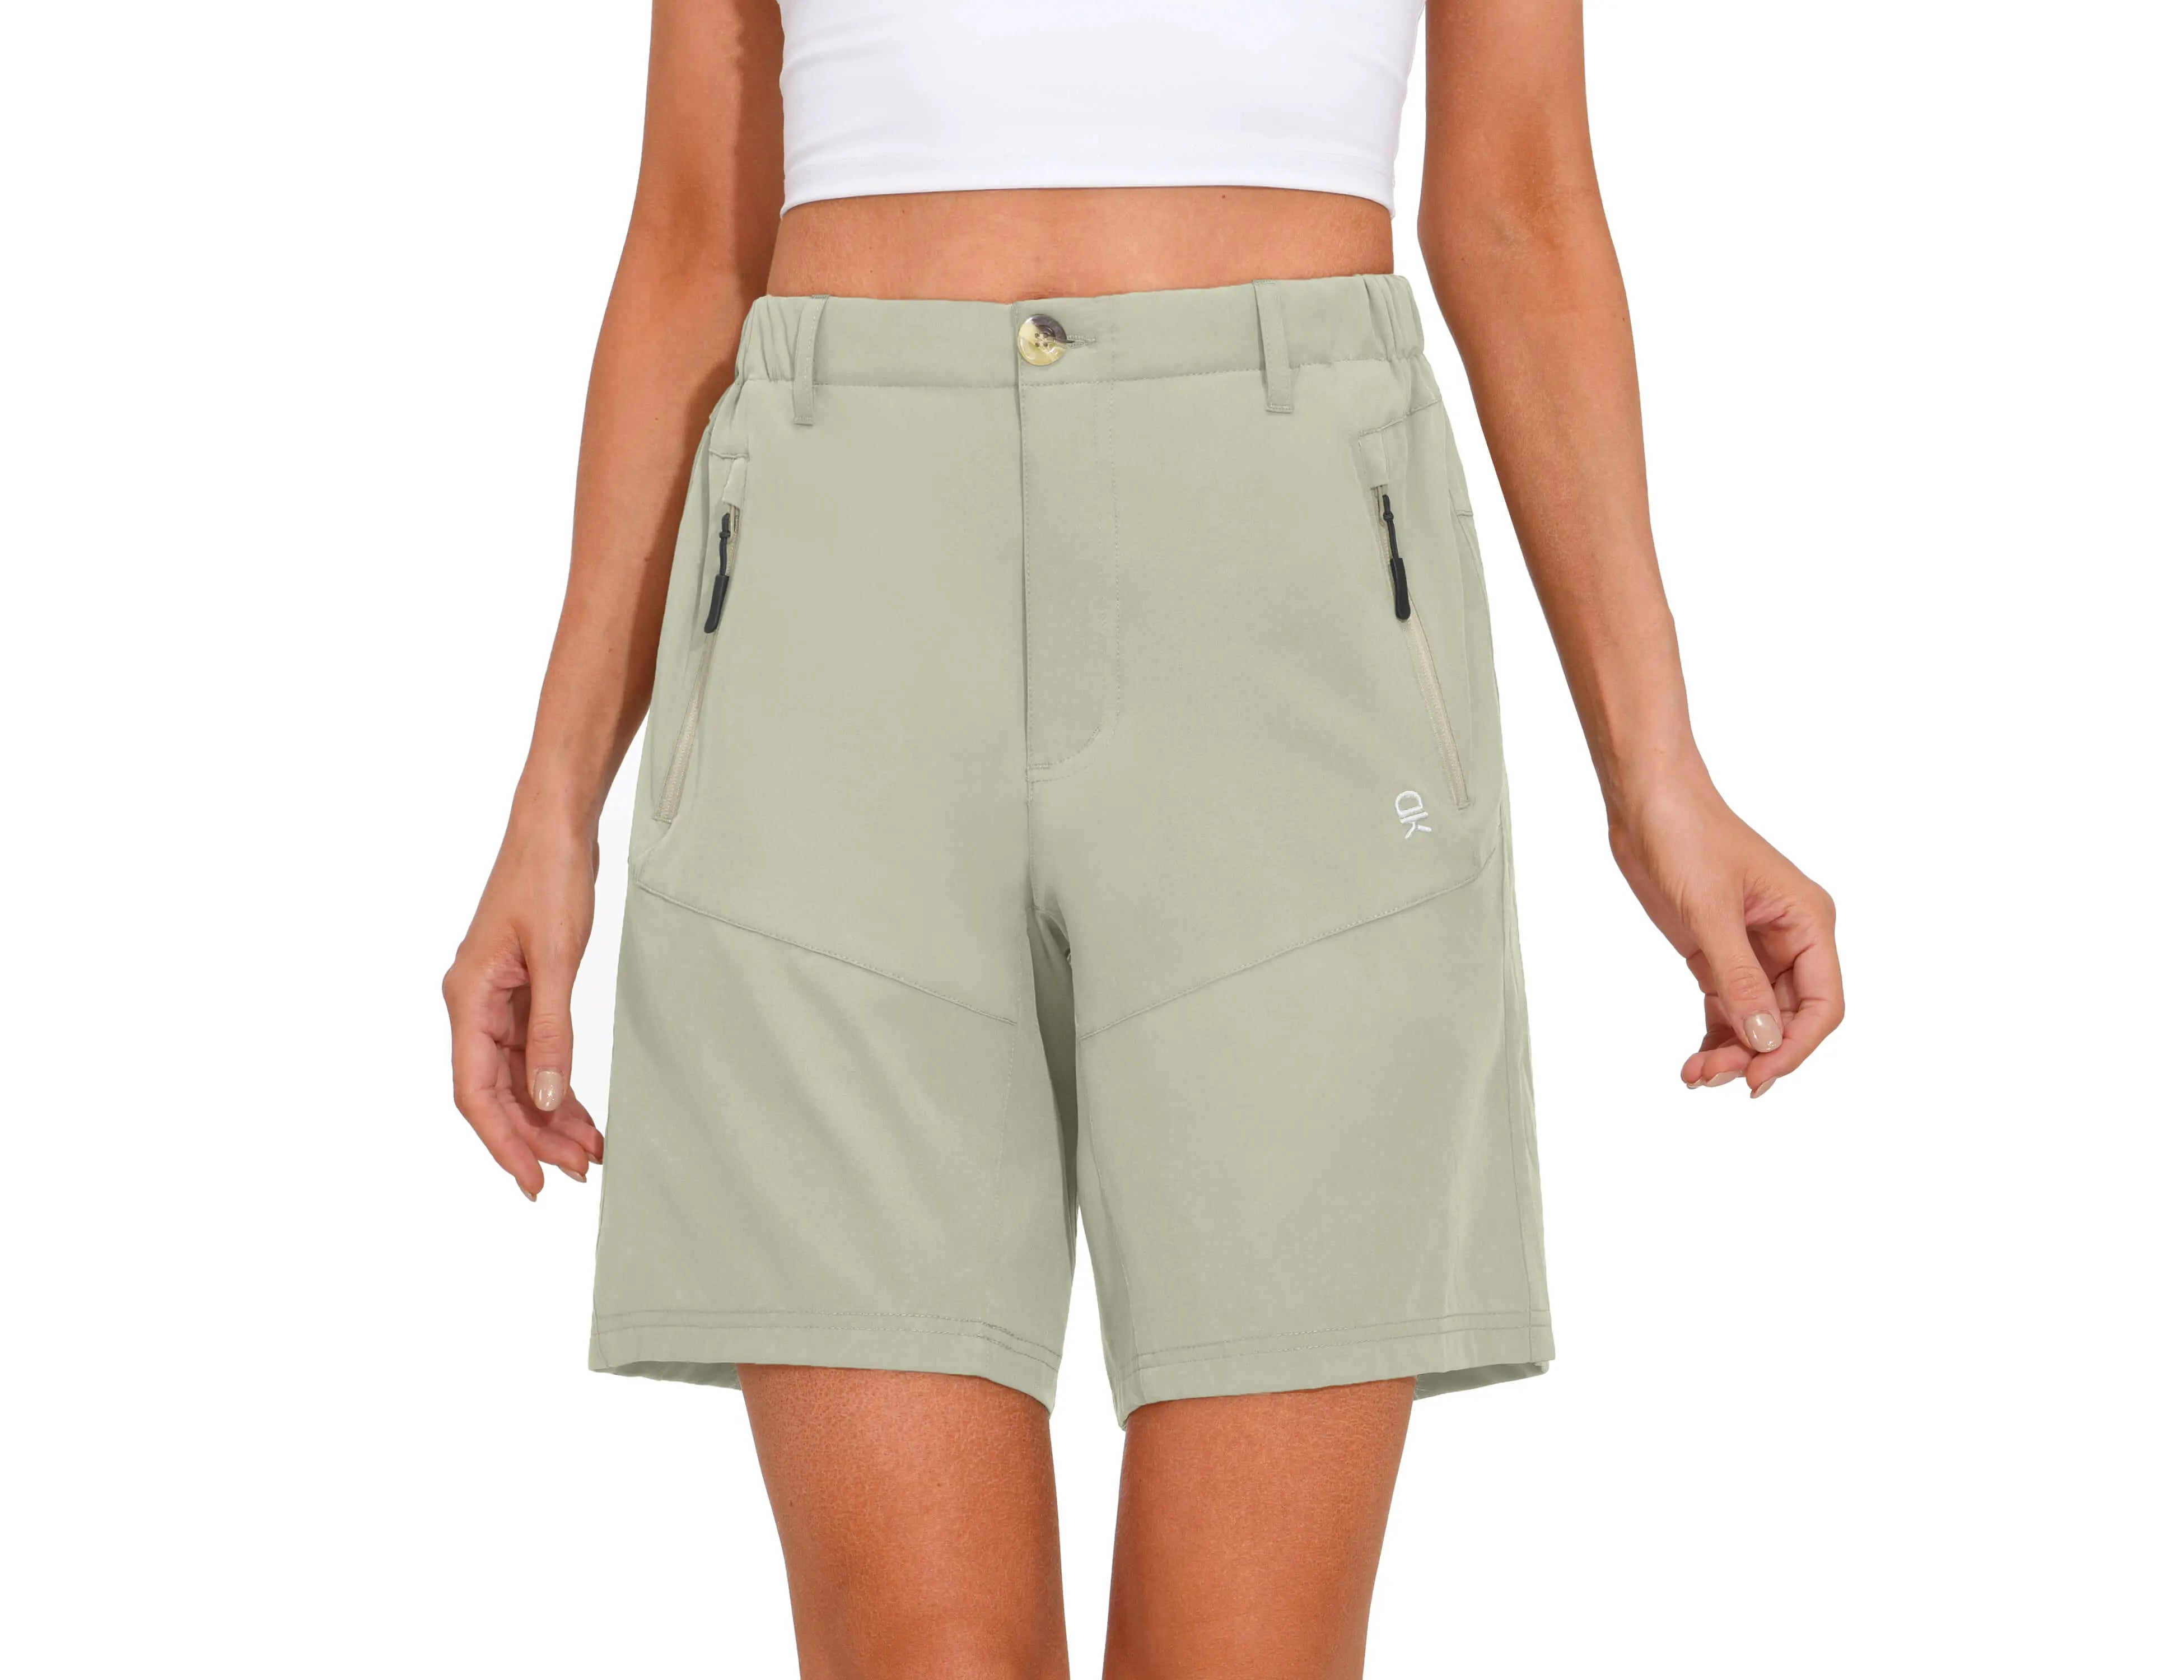 Women's Stretch Quick Dry UPF 50+ Shorts for Hiking, Camping, Travel YZF US-DK